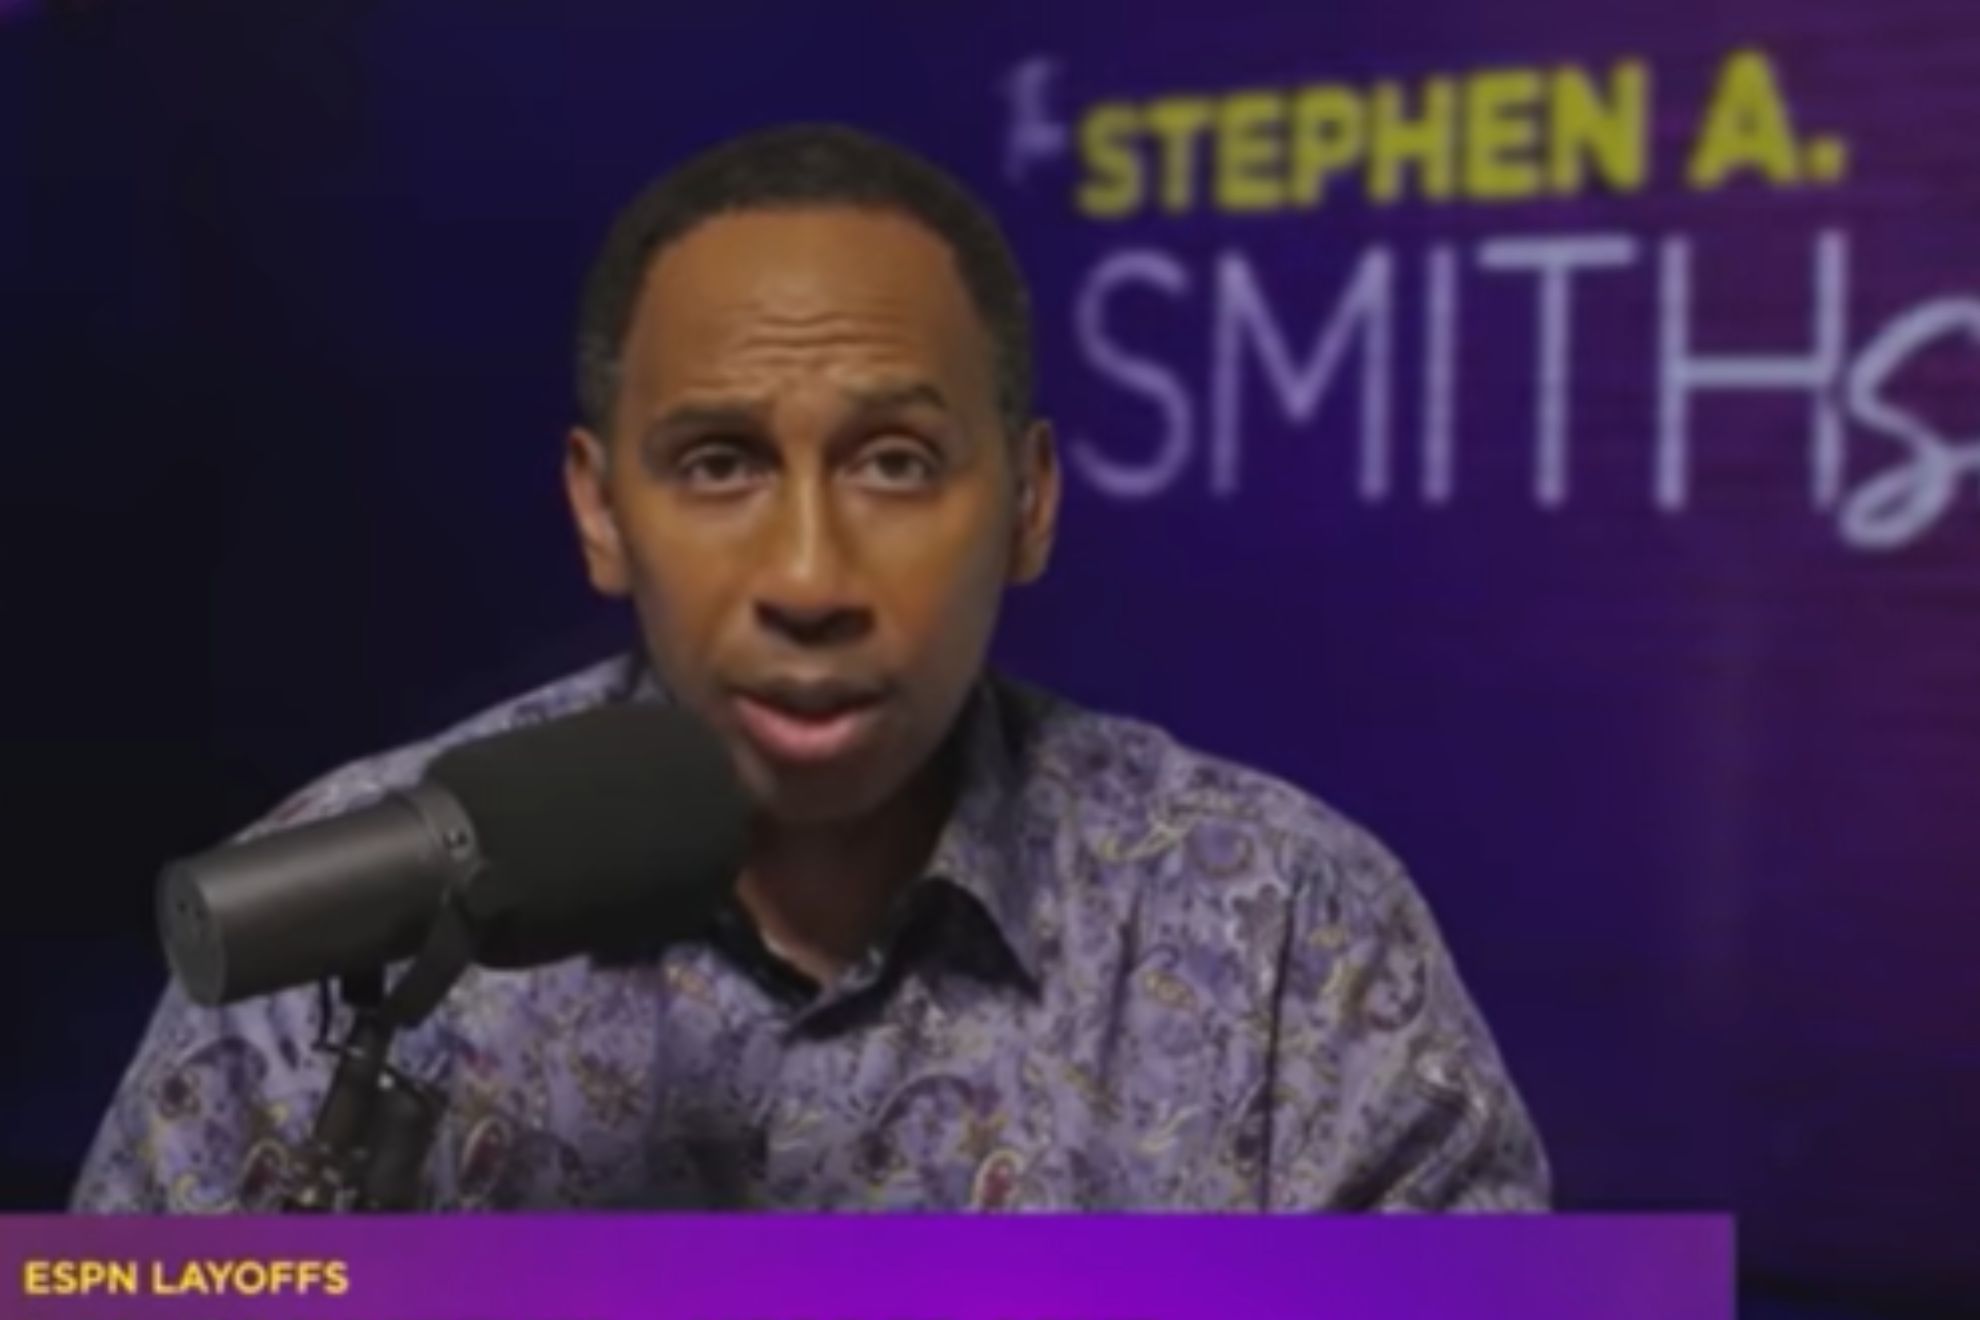 Stephen A. Smith lashes out at ESPN for recent layoffs, believes hes next